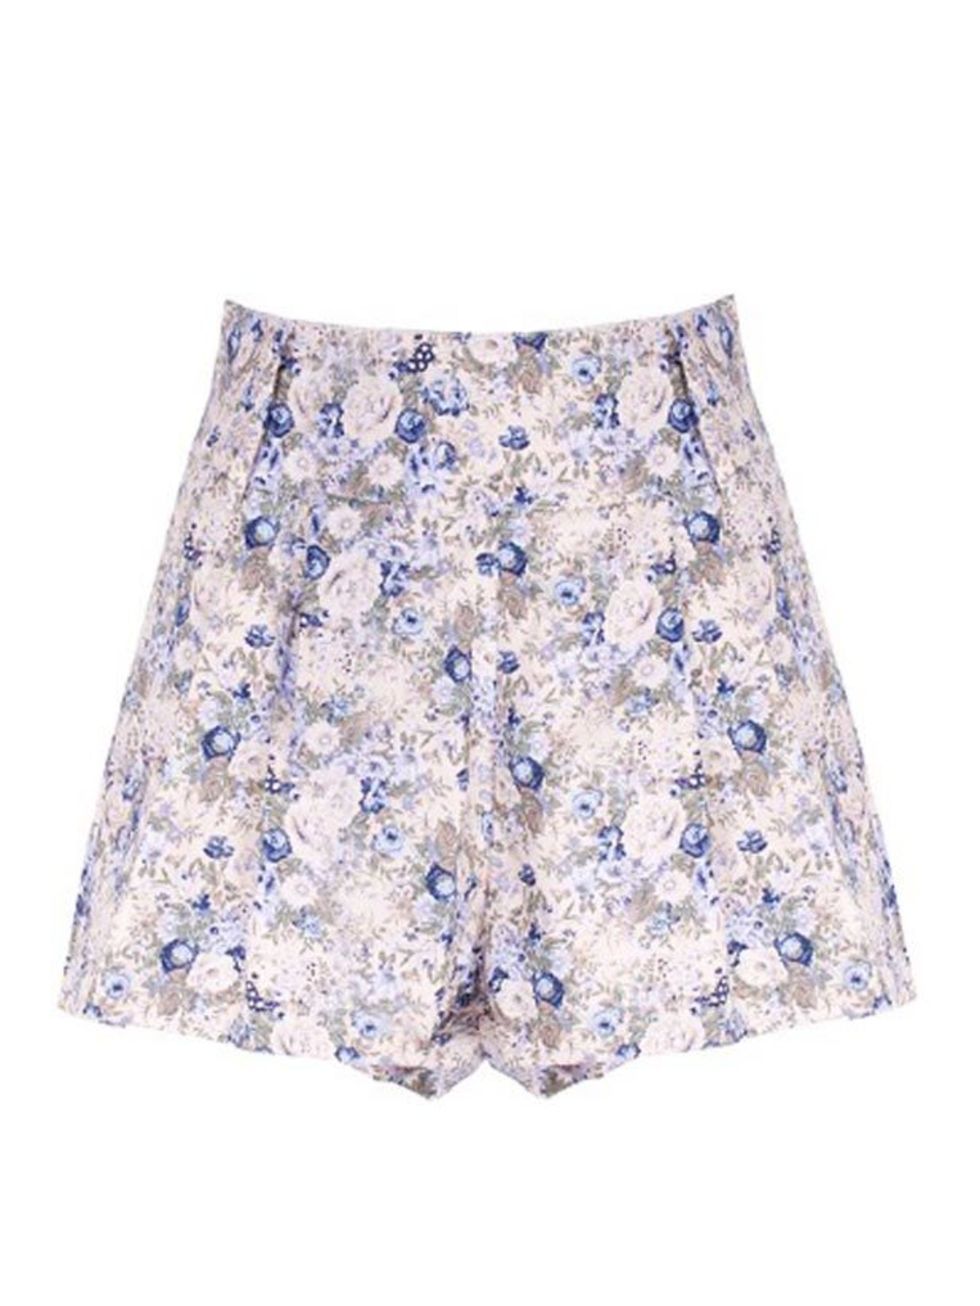 <p>Florals are key this season and PPBs printed shorts are a super cute way to work the trend in the hot weather PPB floral shorts, £24, at <a href="http://www.pretaportobello.com/shop/bottoms/bottoms/ppb-floral-mini-shorts.aspx">Pret-a-Portobello</a></